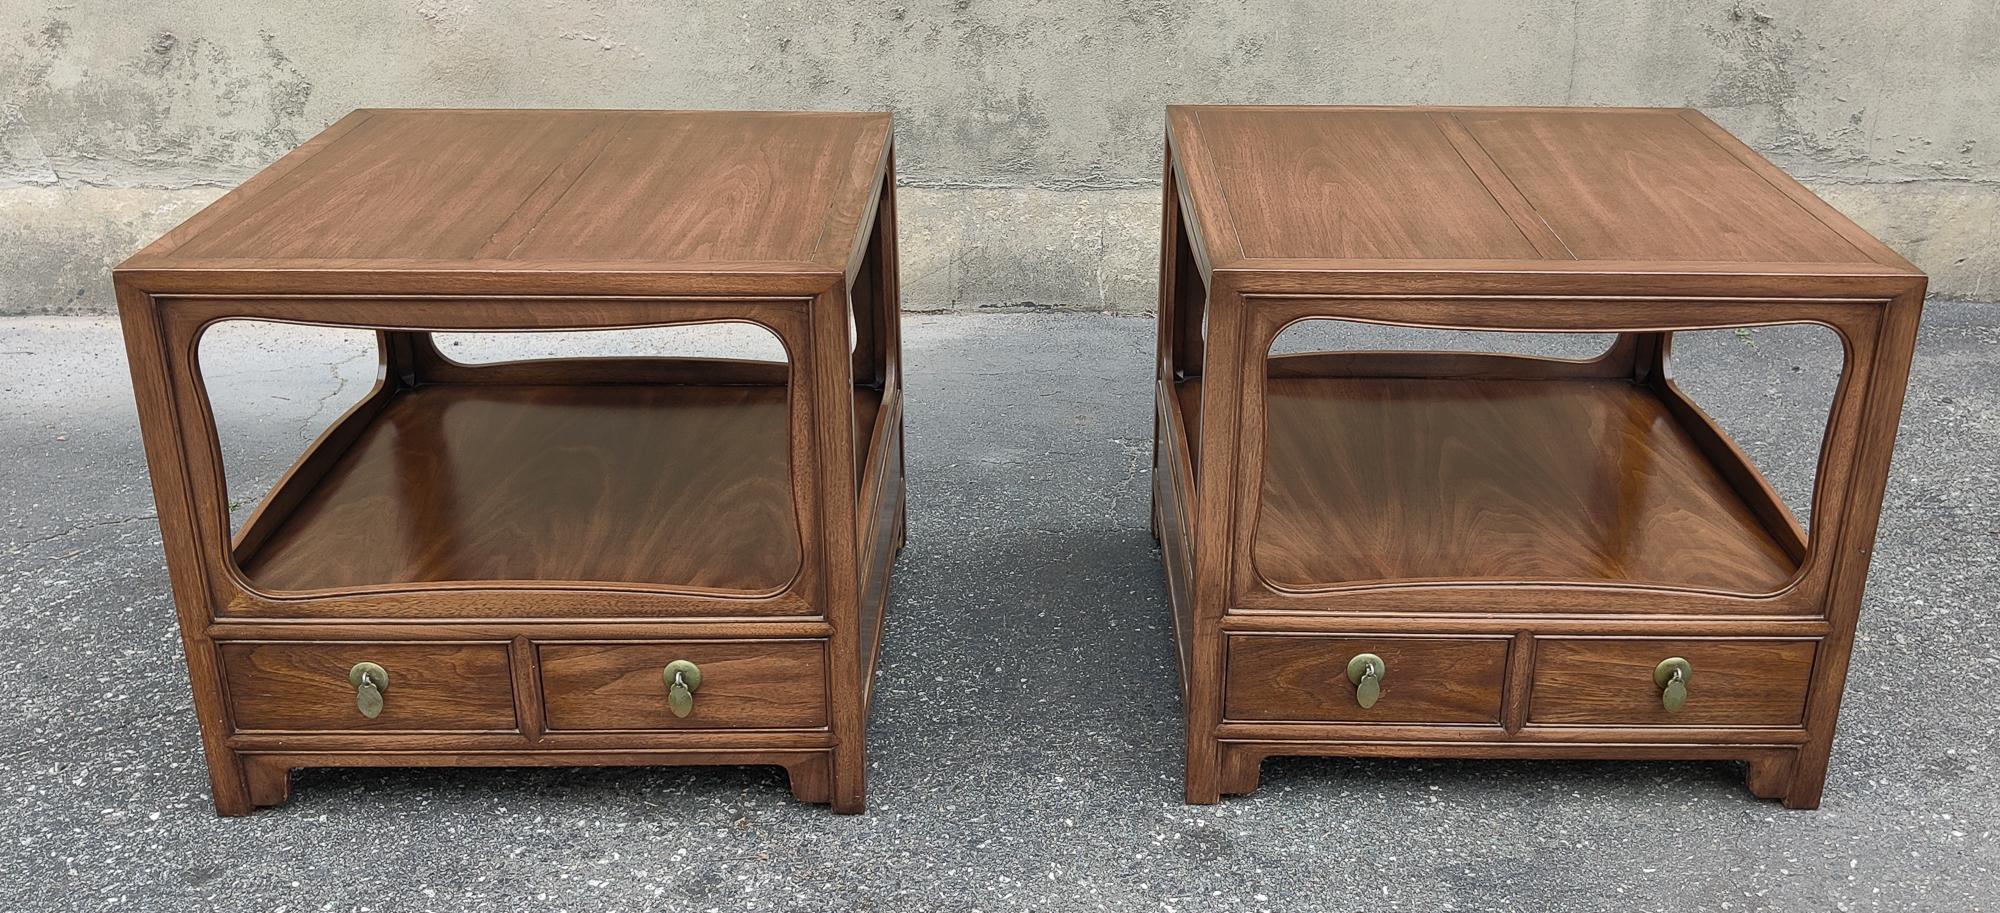 This pair of large end tables or nightstands were designed by Michael Taylor for Baker's Far East Collection. Featuring a rich mahogany construction, its finish is dramatic and elegant. There are two drawers on the bottom of each that have clean